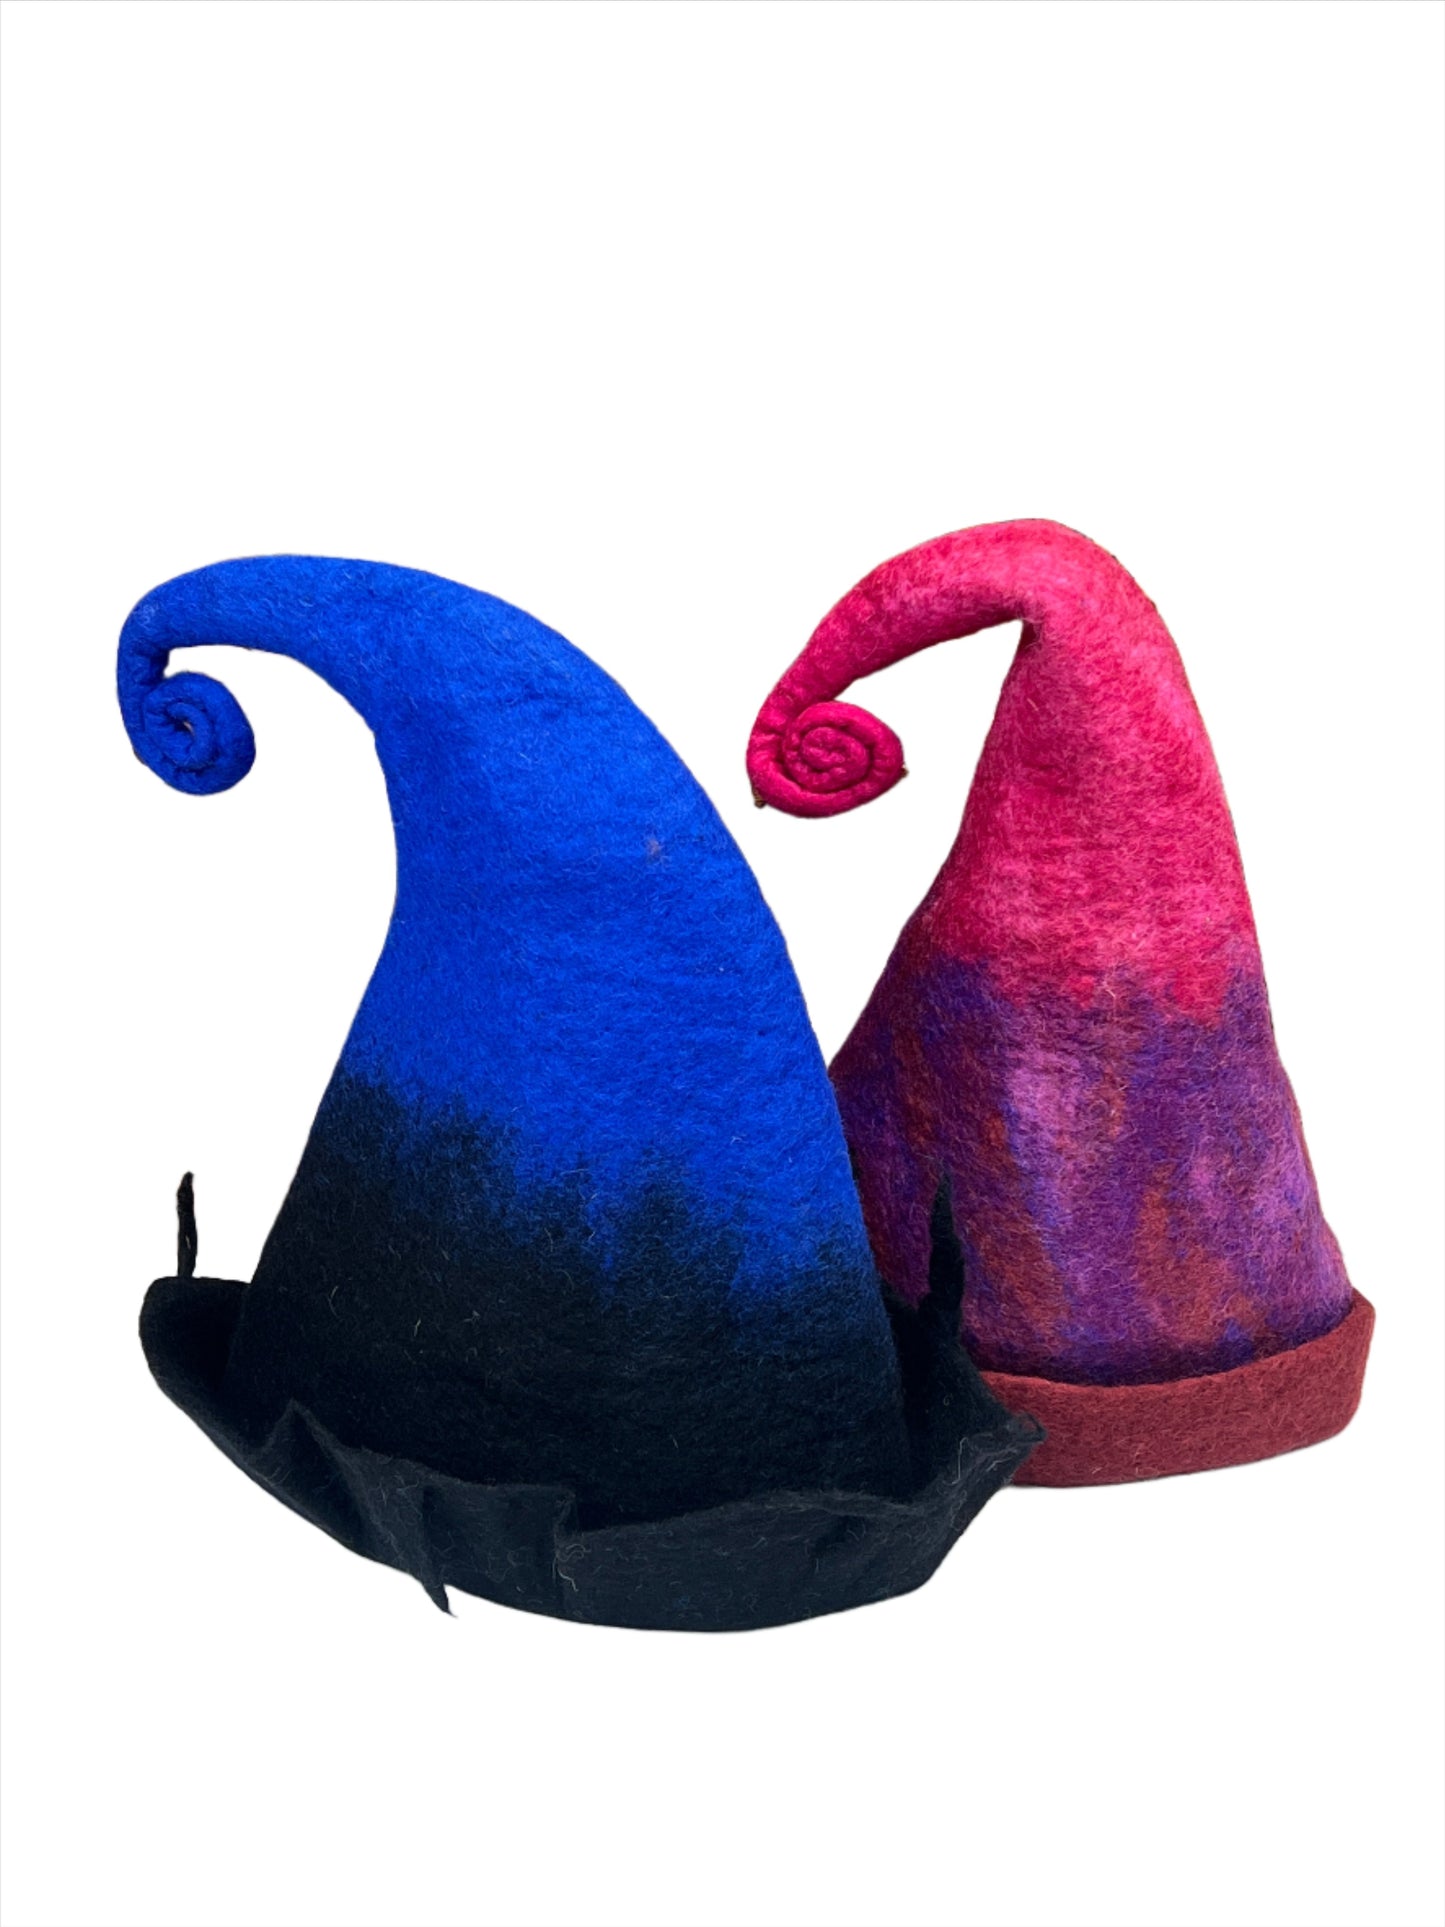 Hand felted Gradient Wool Hats